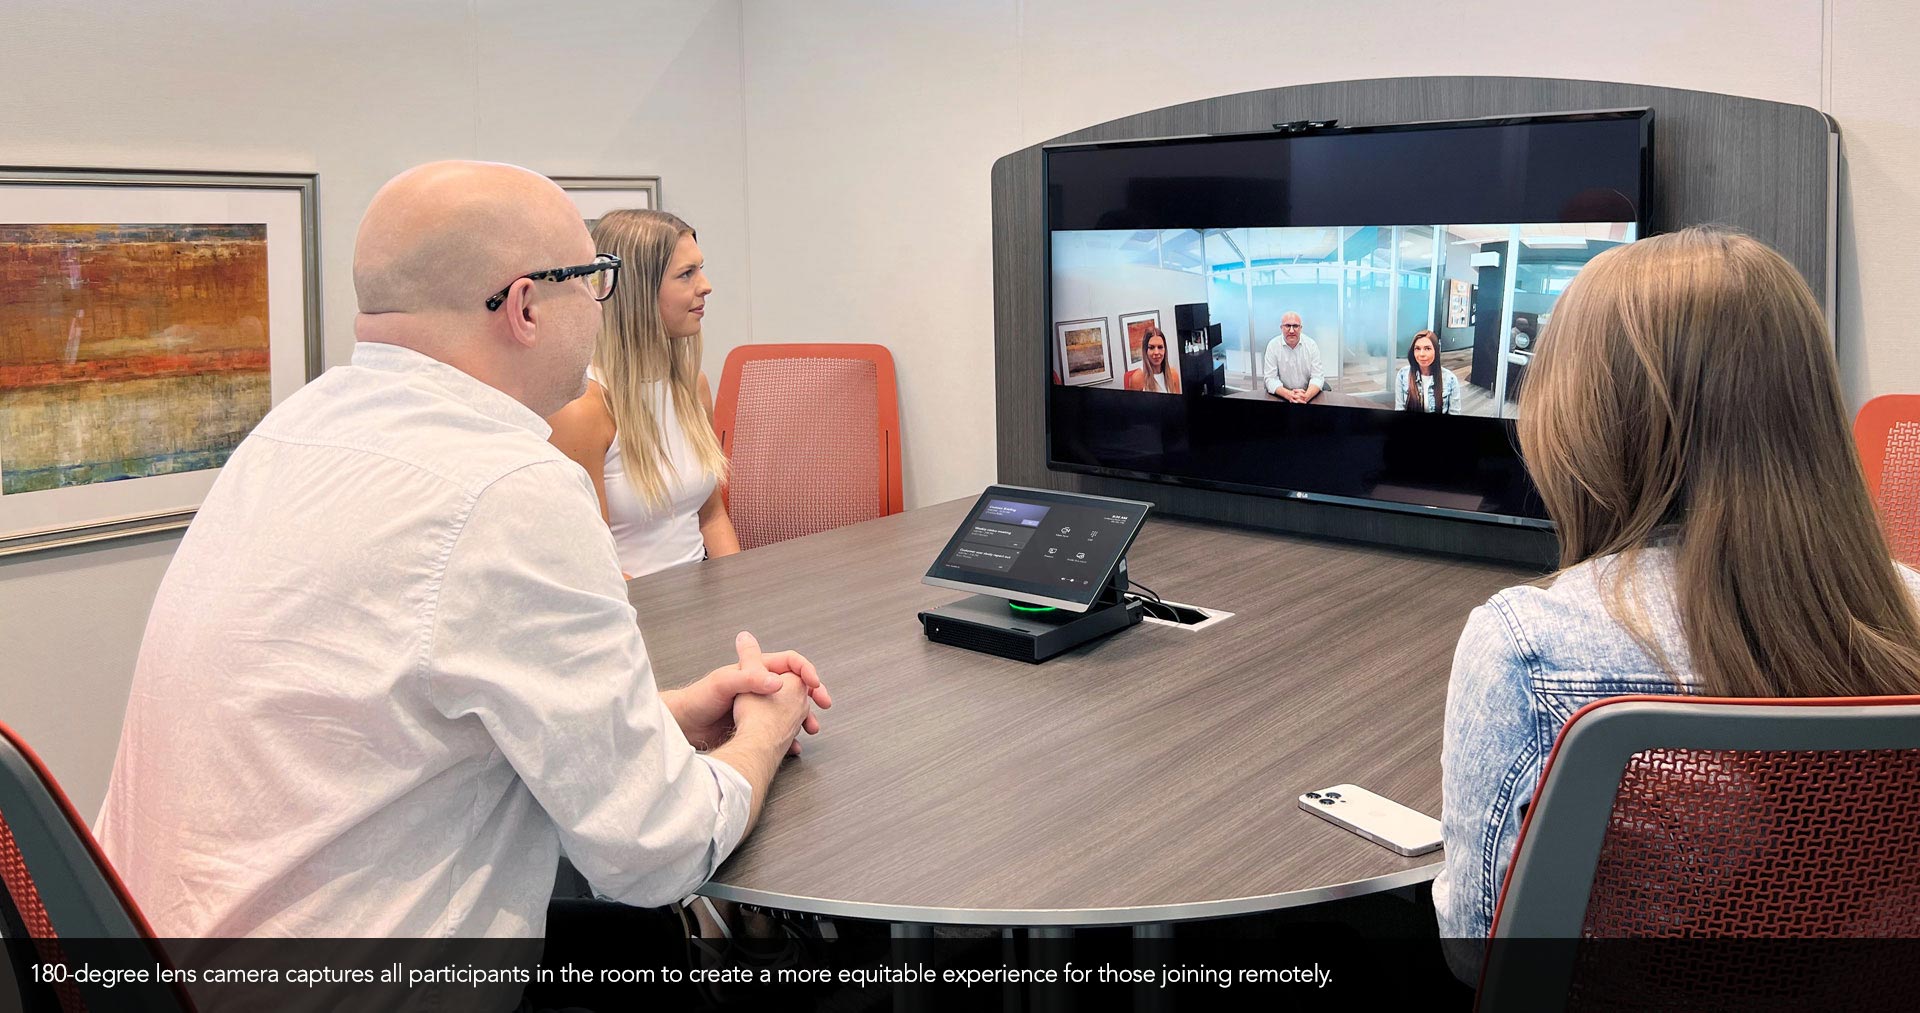 180-degree lens camera captures all participants in the room to create a more equitable experience for those joining remotely.